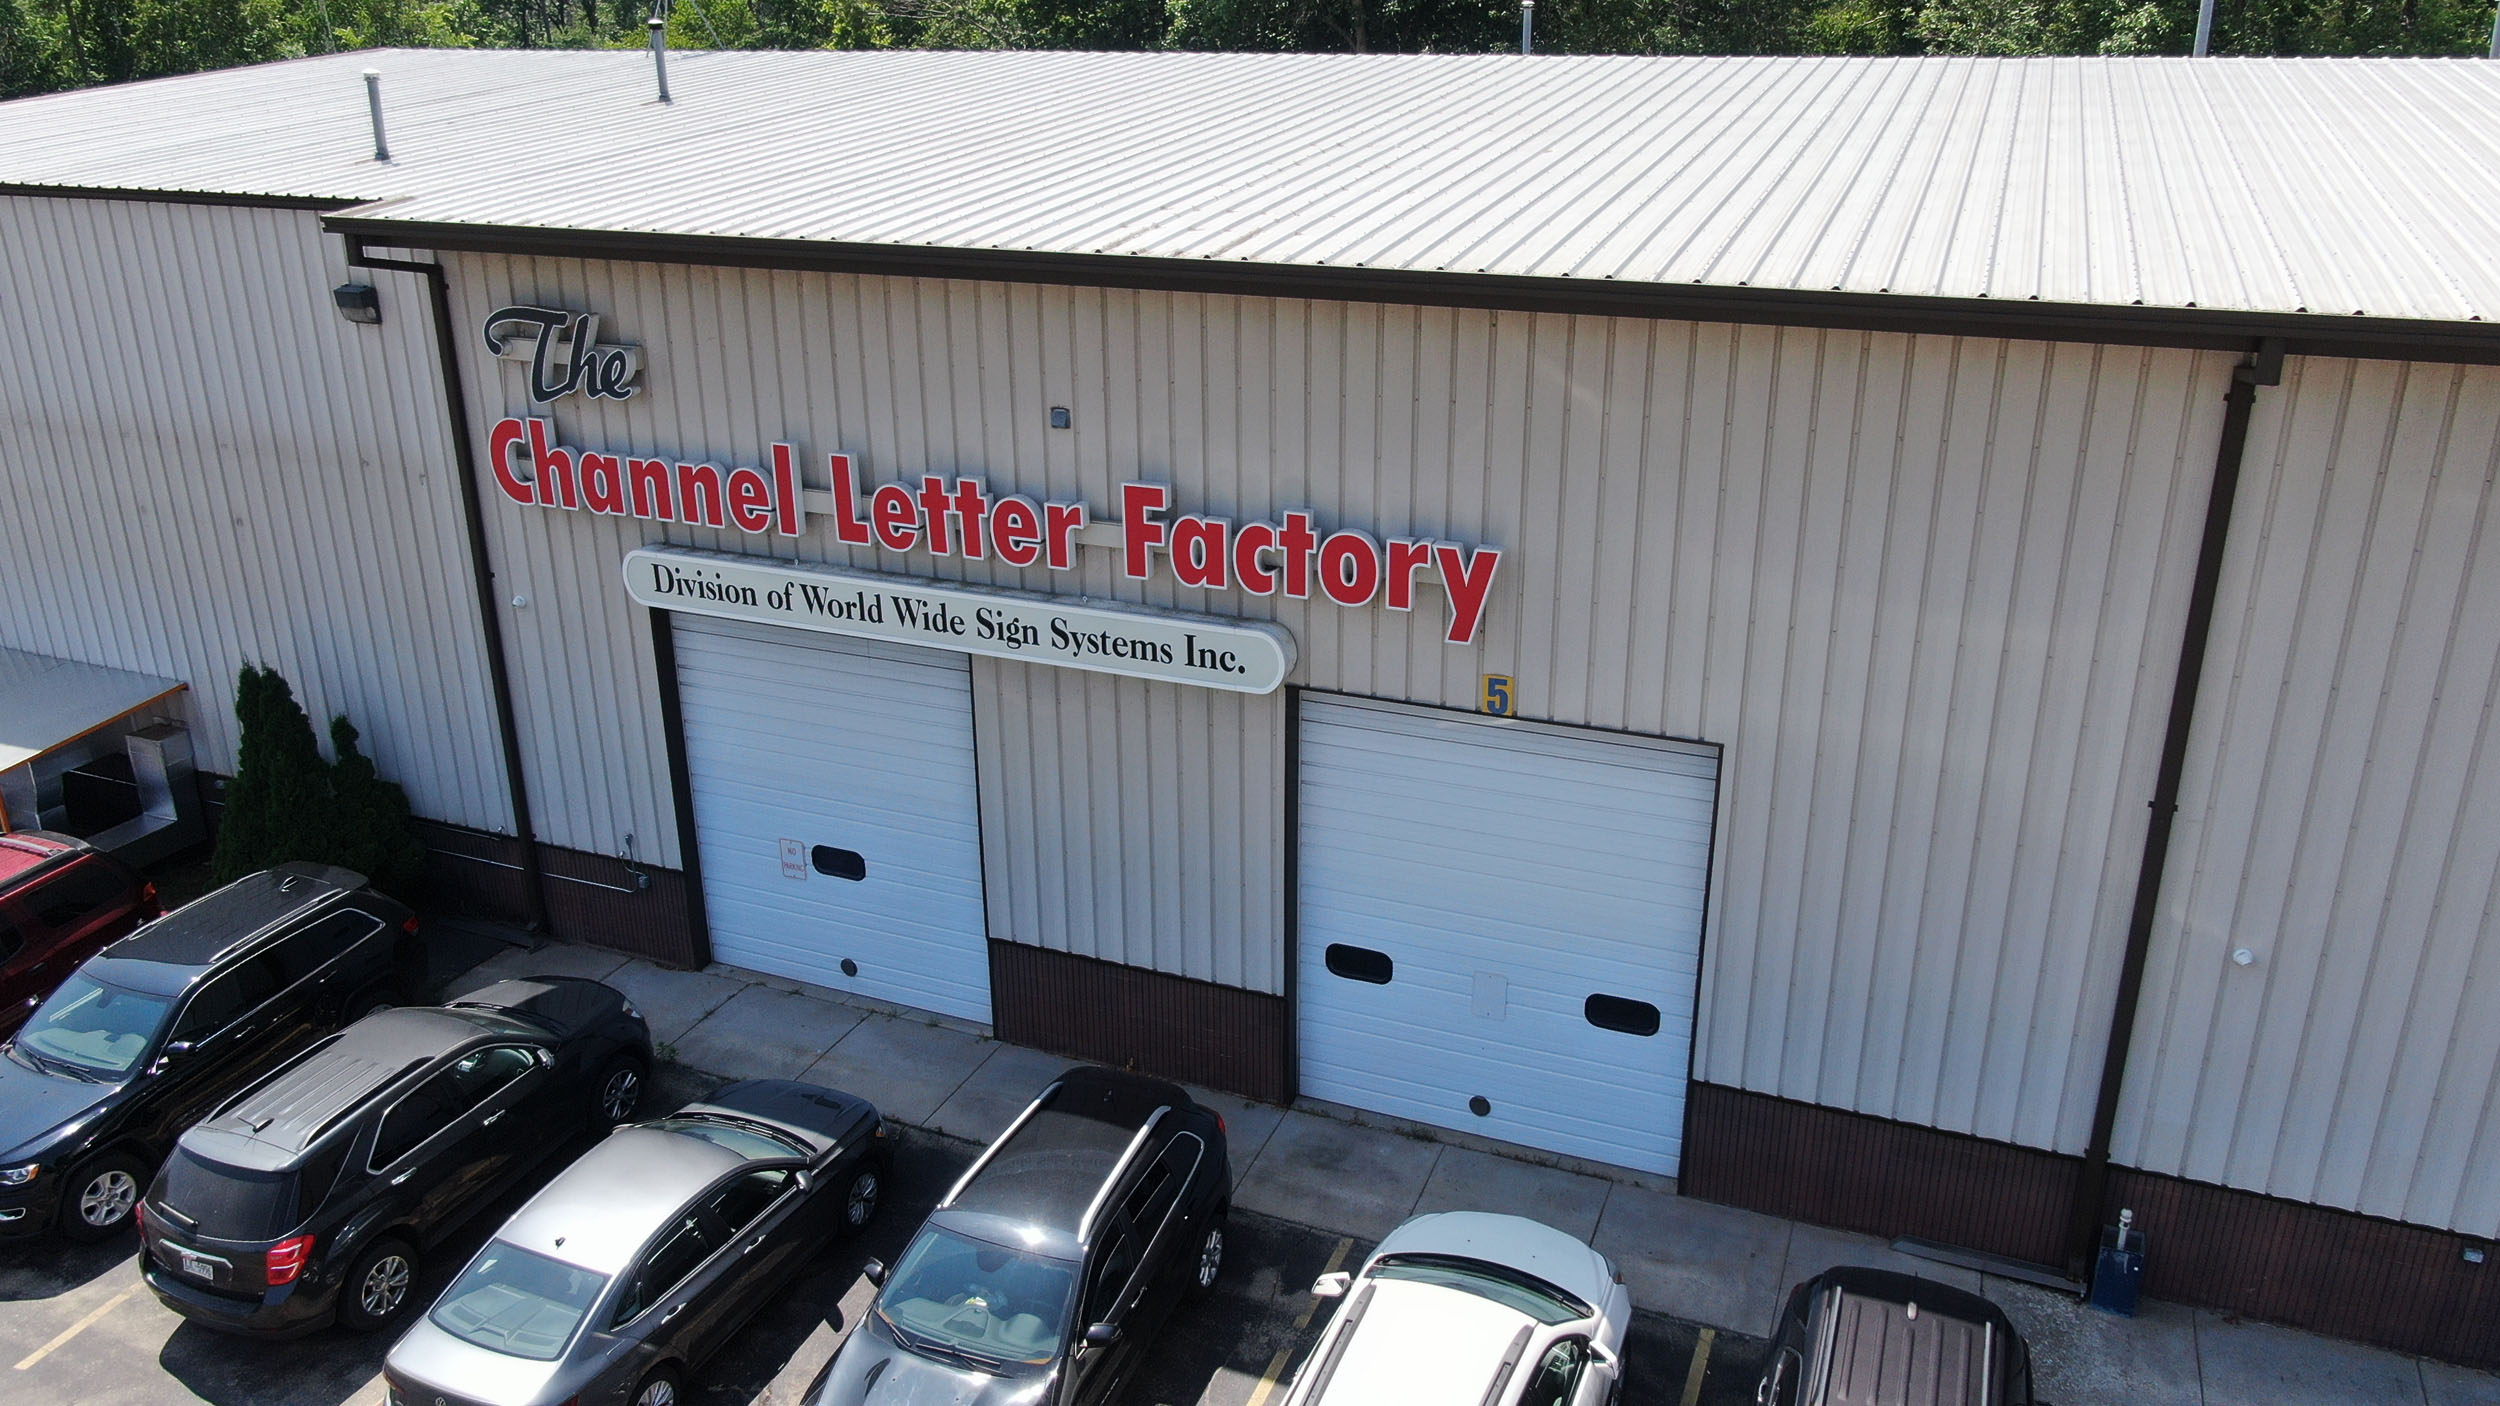 The Channel Letter Factory, shawano wisconsin, custom signs